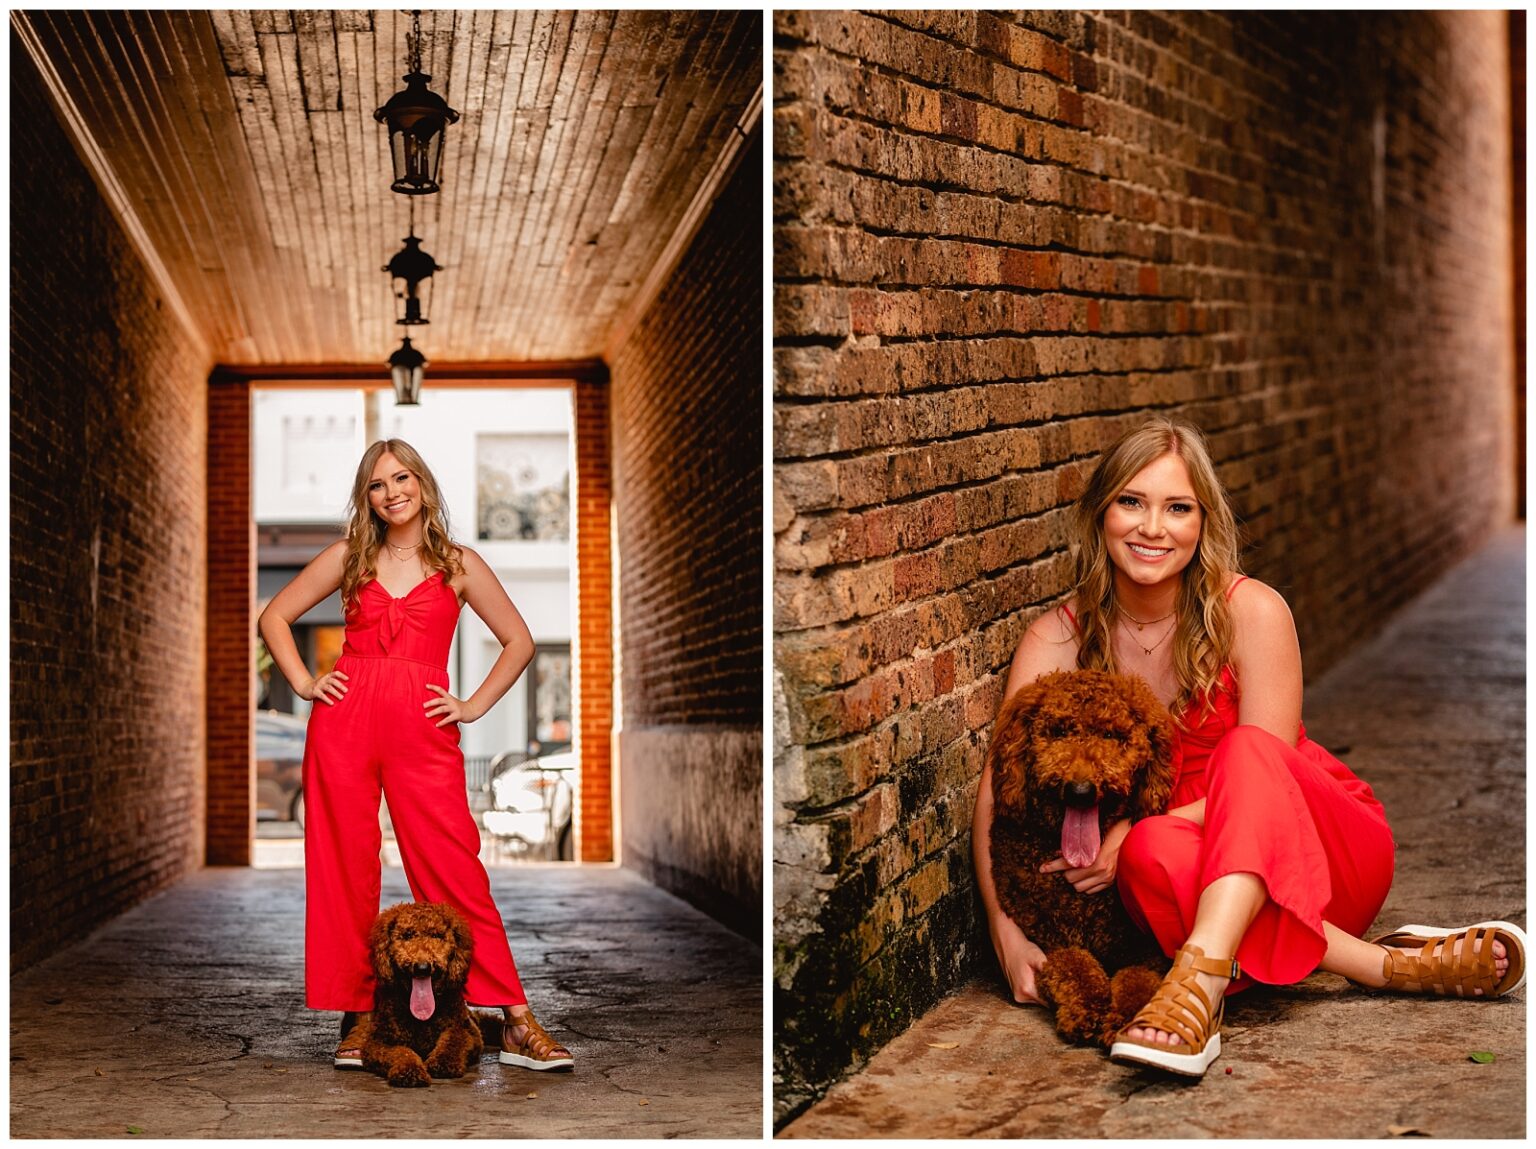 High School Senior takes pictures in historic town, Thomasville, Georgia, in old brick alley with her Golden Doodle Dog.